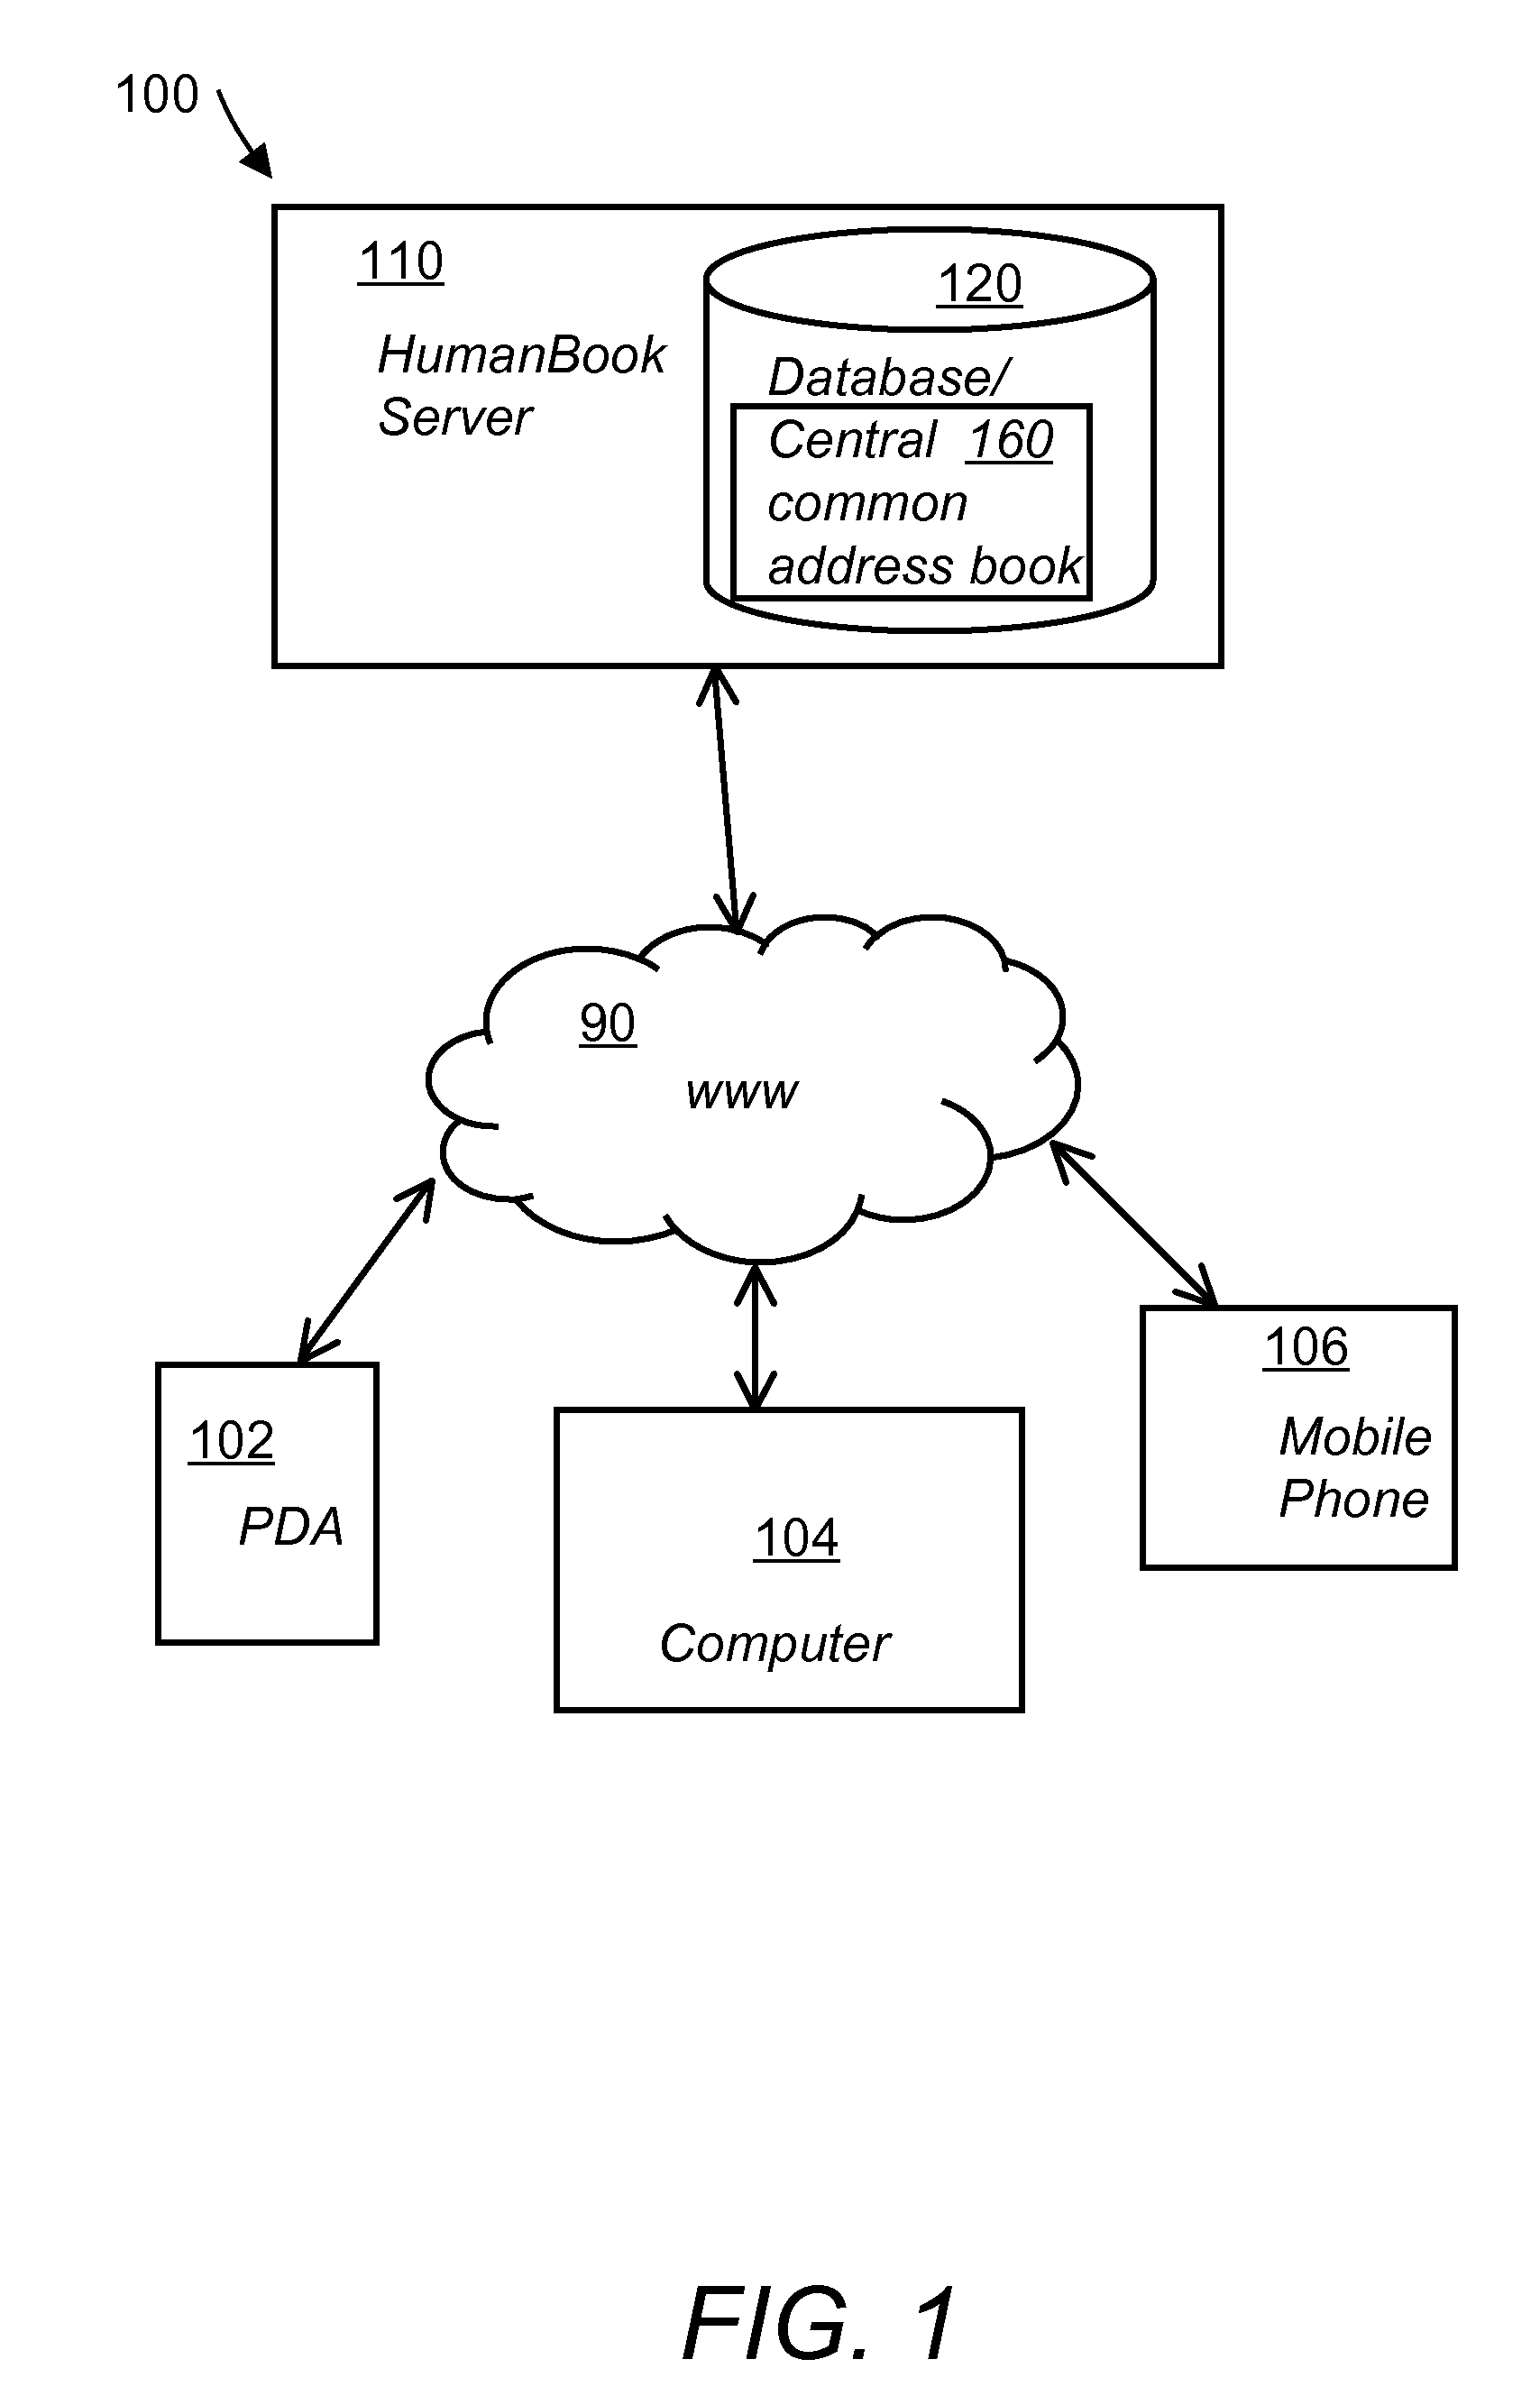 System and method for a web-based address book